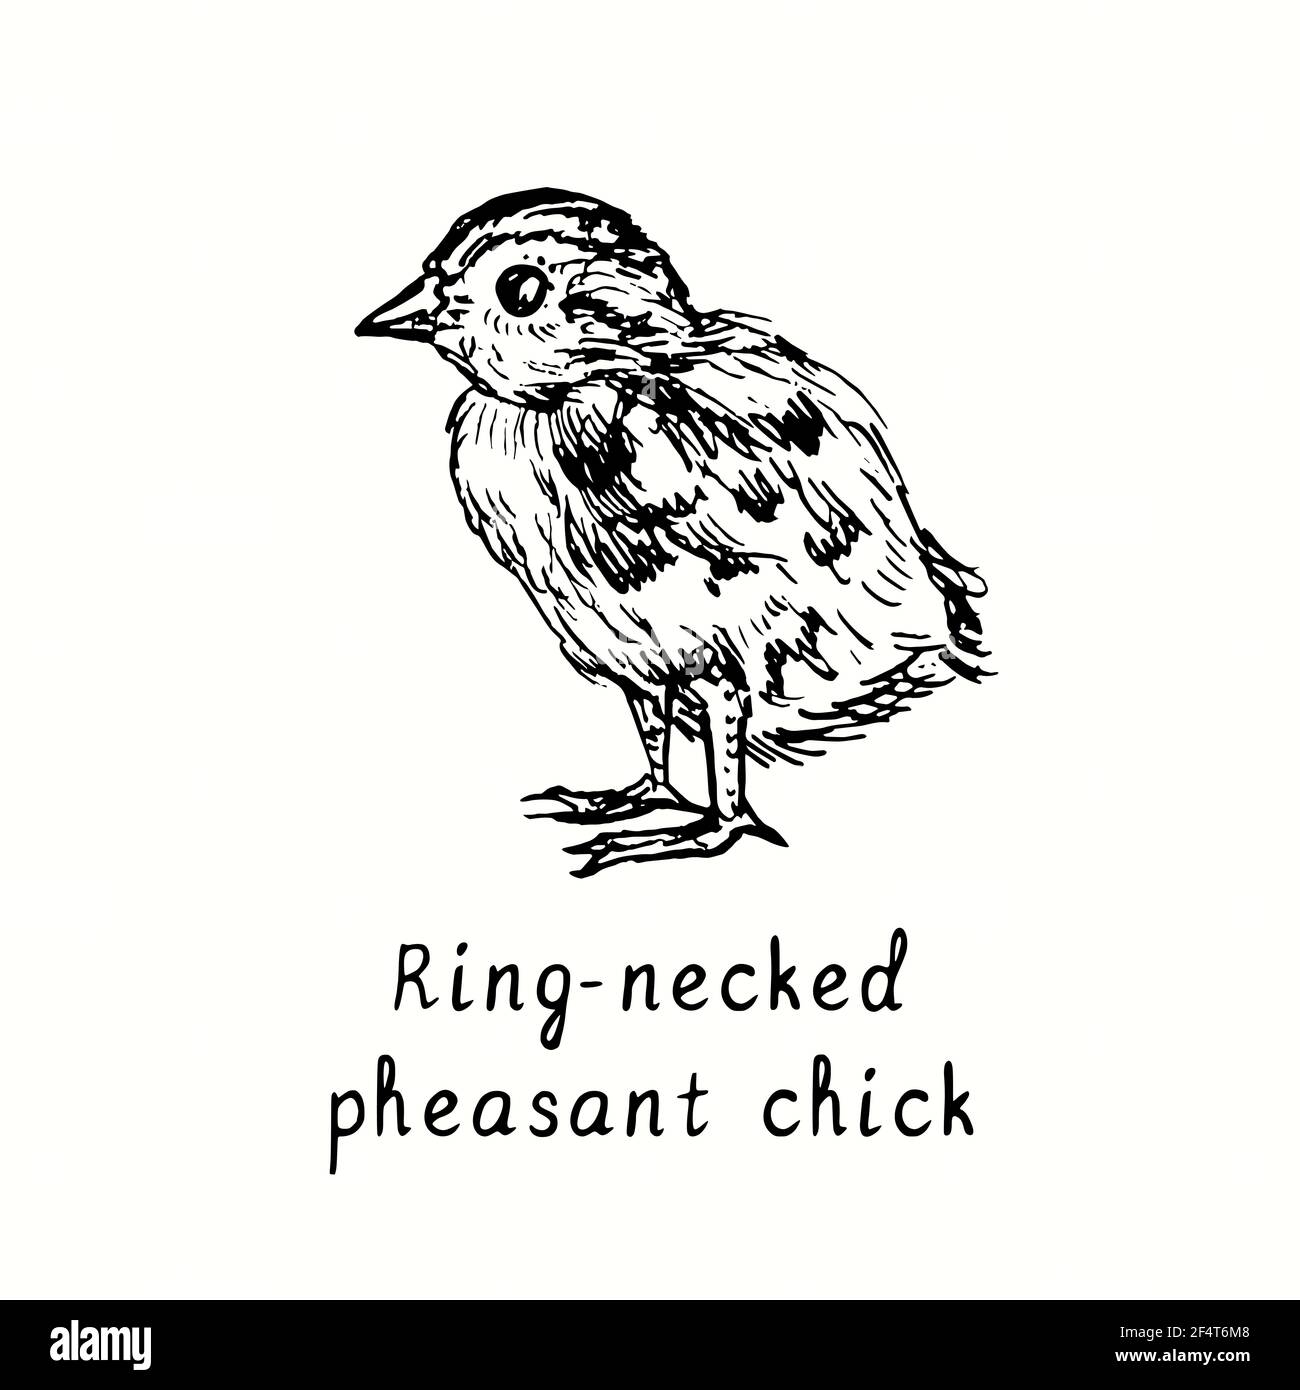 Ring-necked pheasant chick side view. Ink black and white doodle drawing in woodcut outline style. Stock Photo